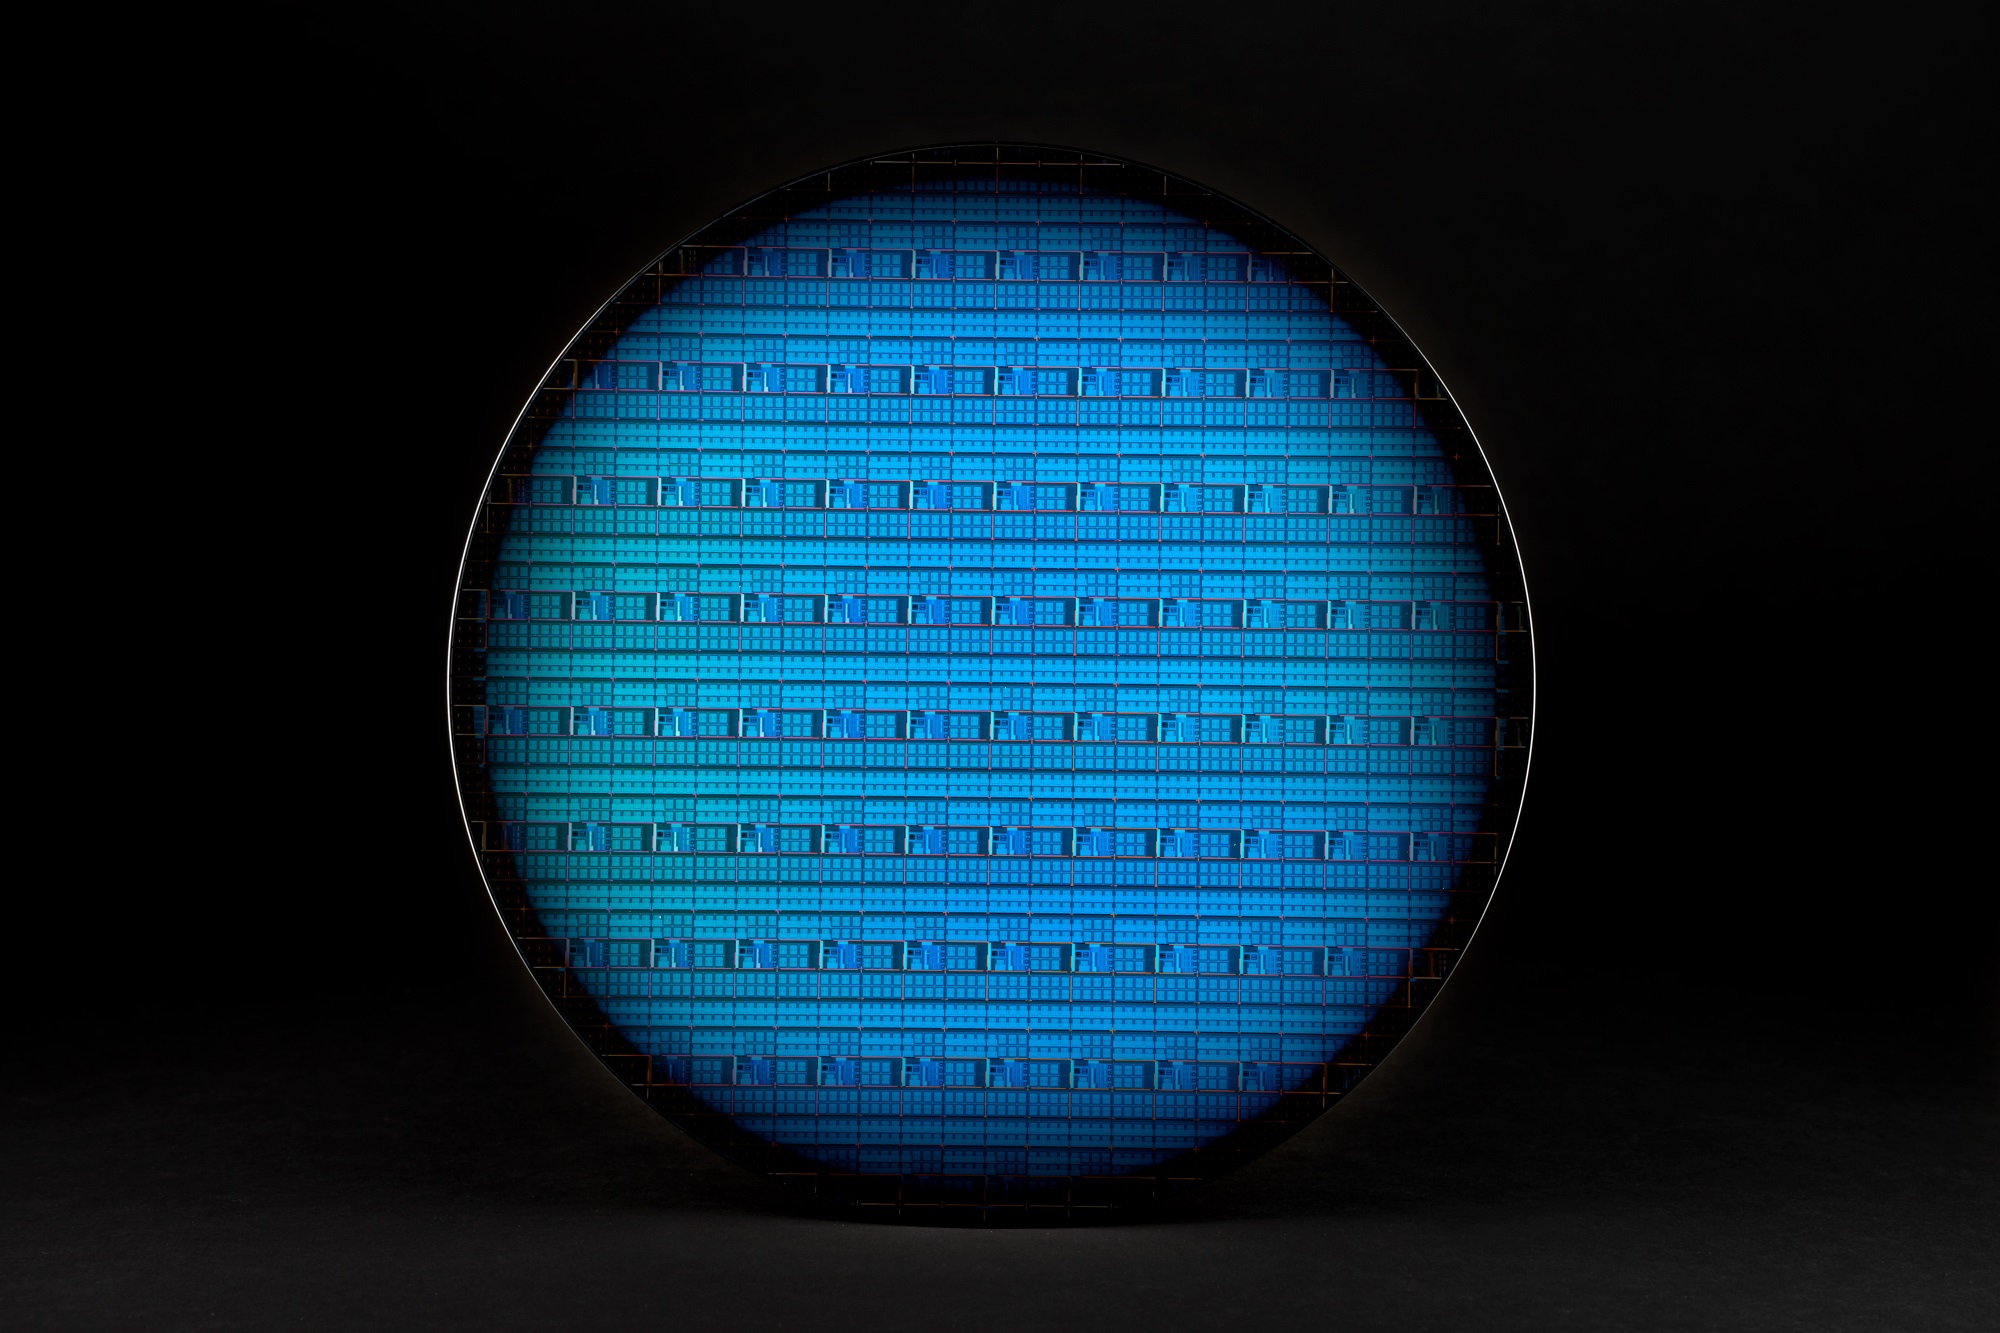 A photo shows a 300-millimeter Intel silicon spin qubit wafer